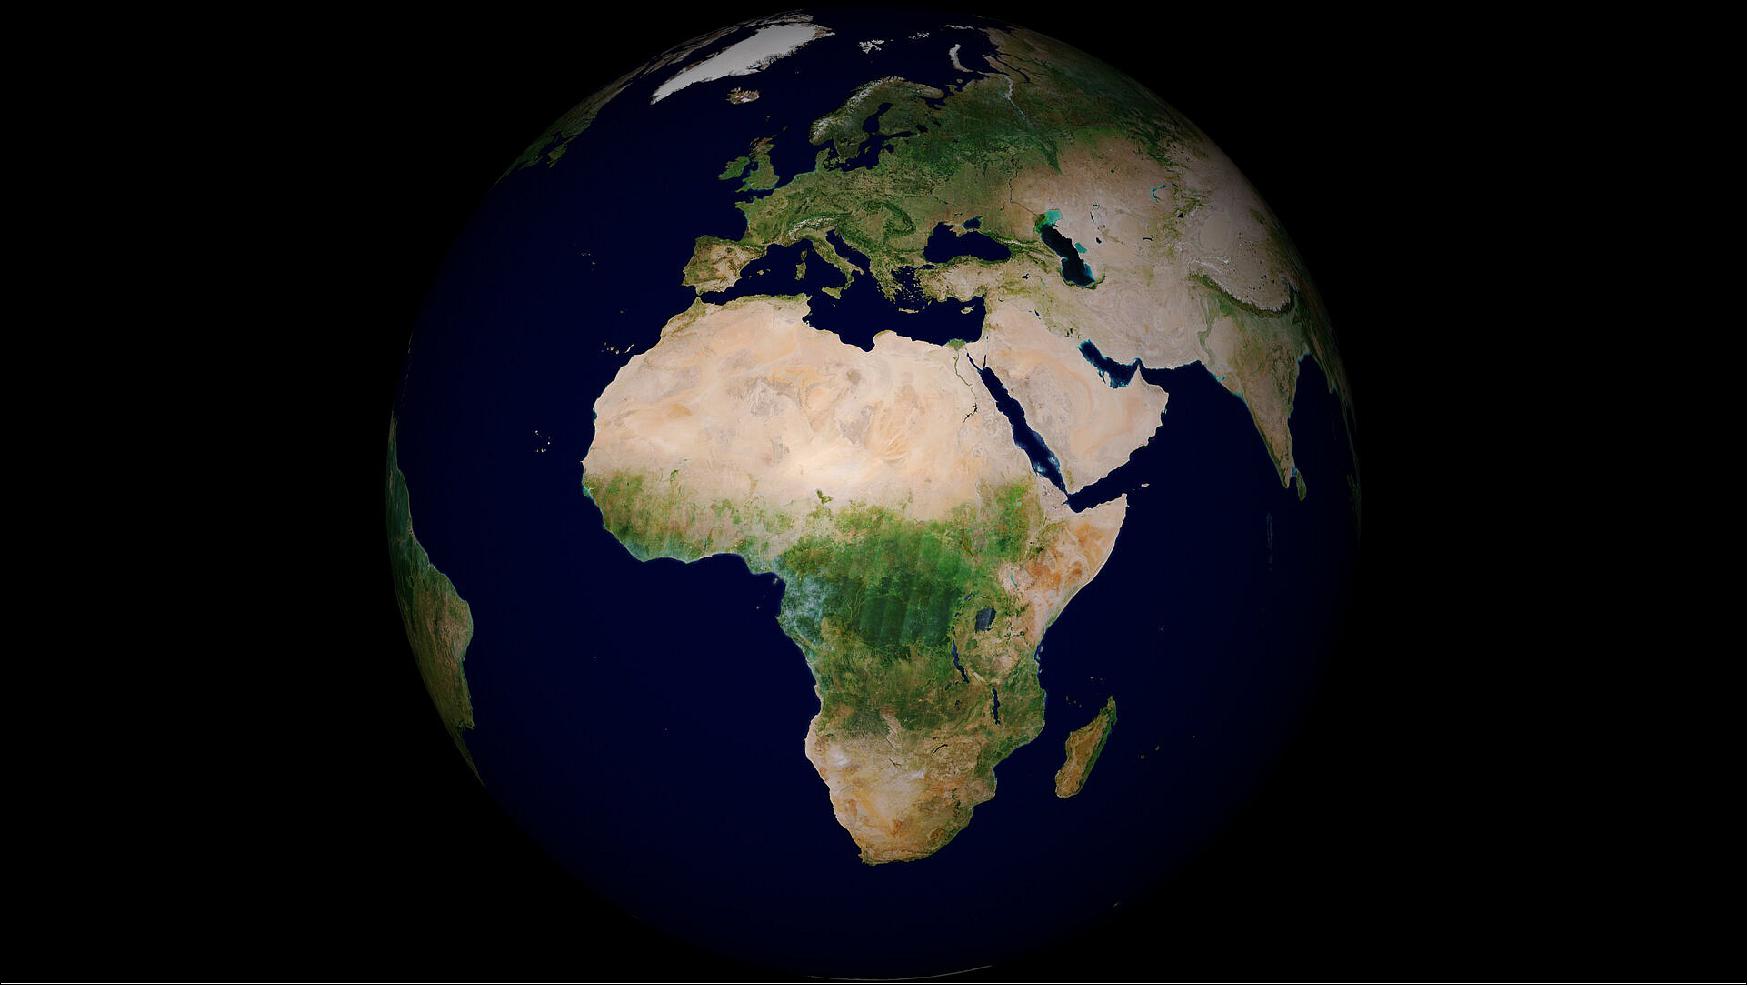 view of Africa